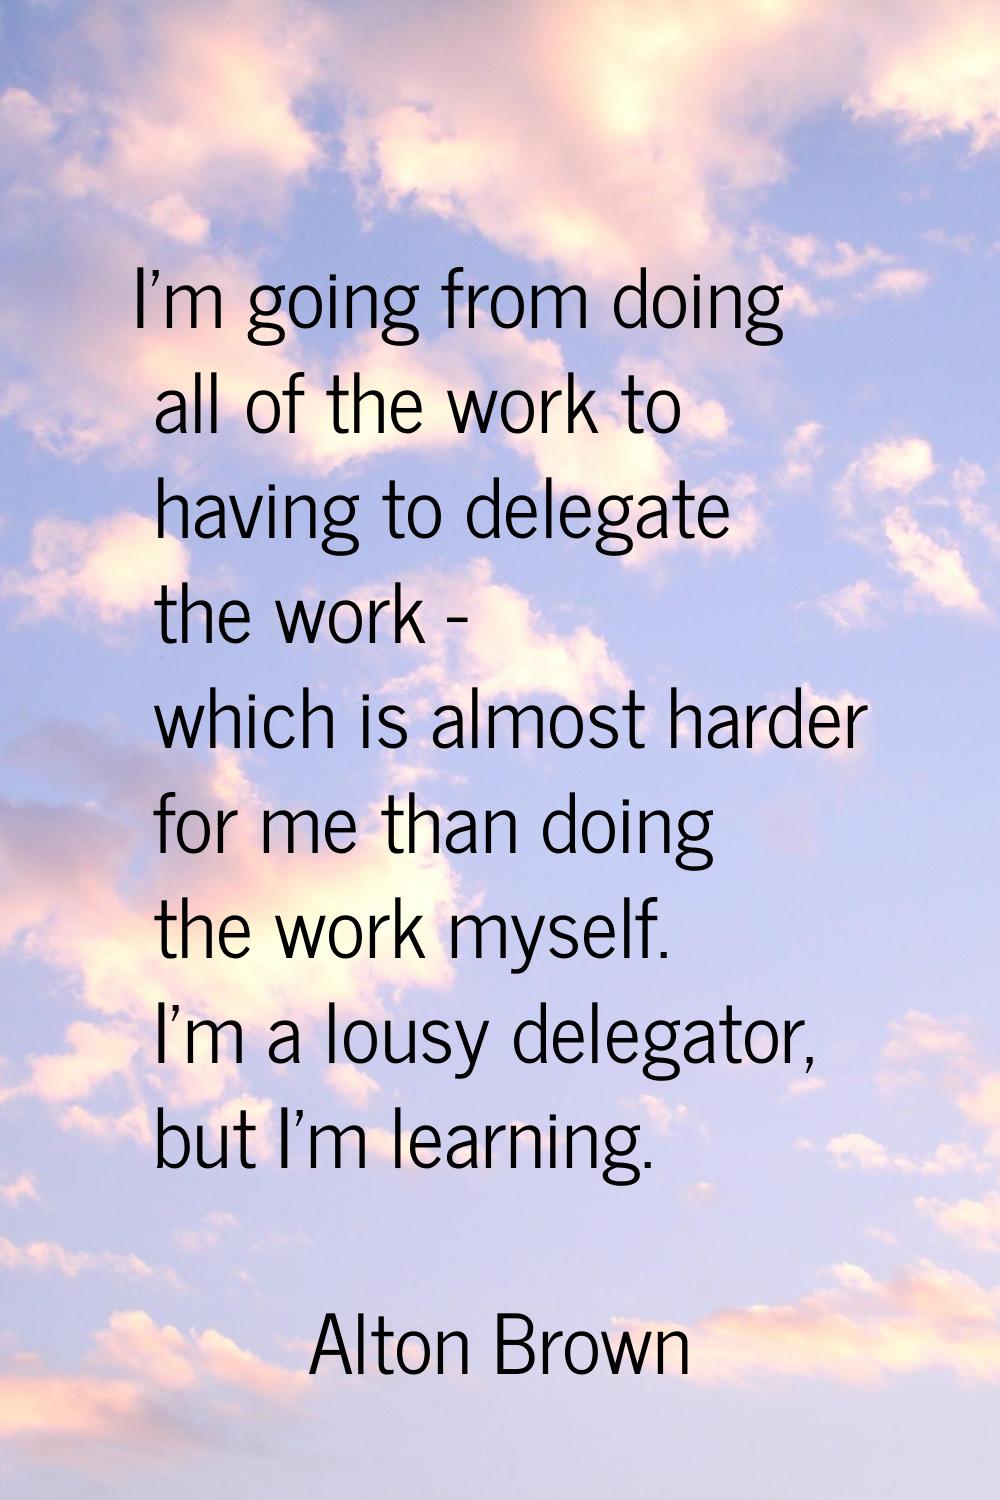 I'm going from doing all of the work to having to delegate the work - which is almost harder for me